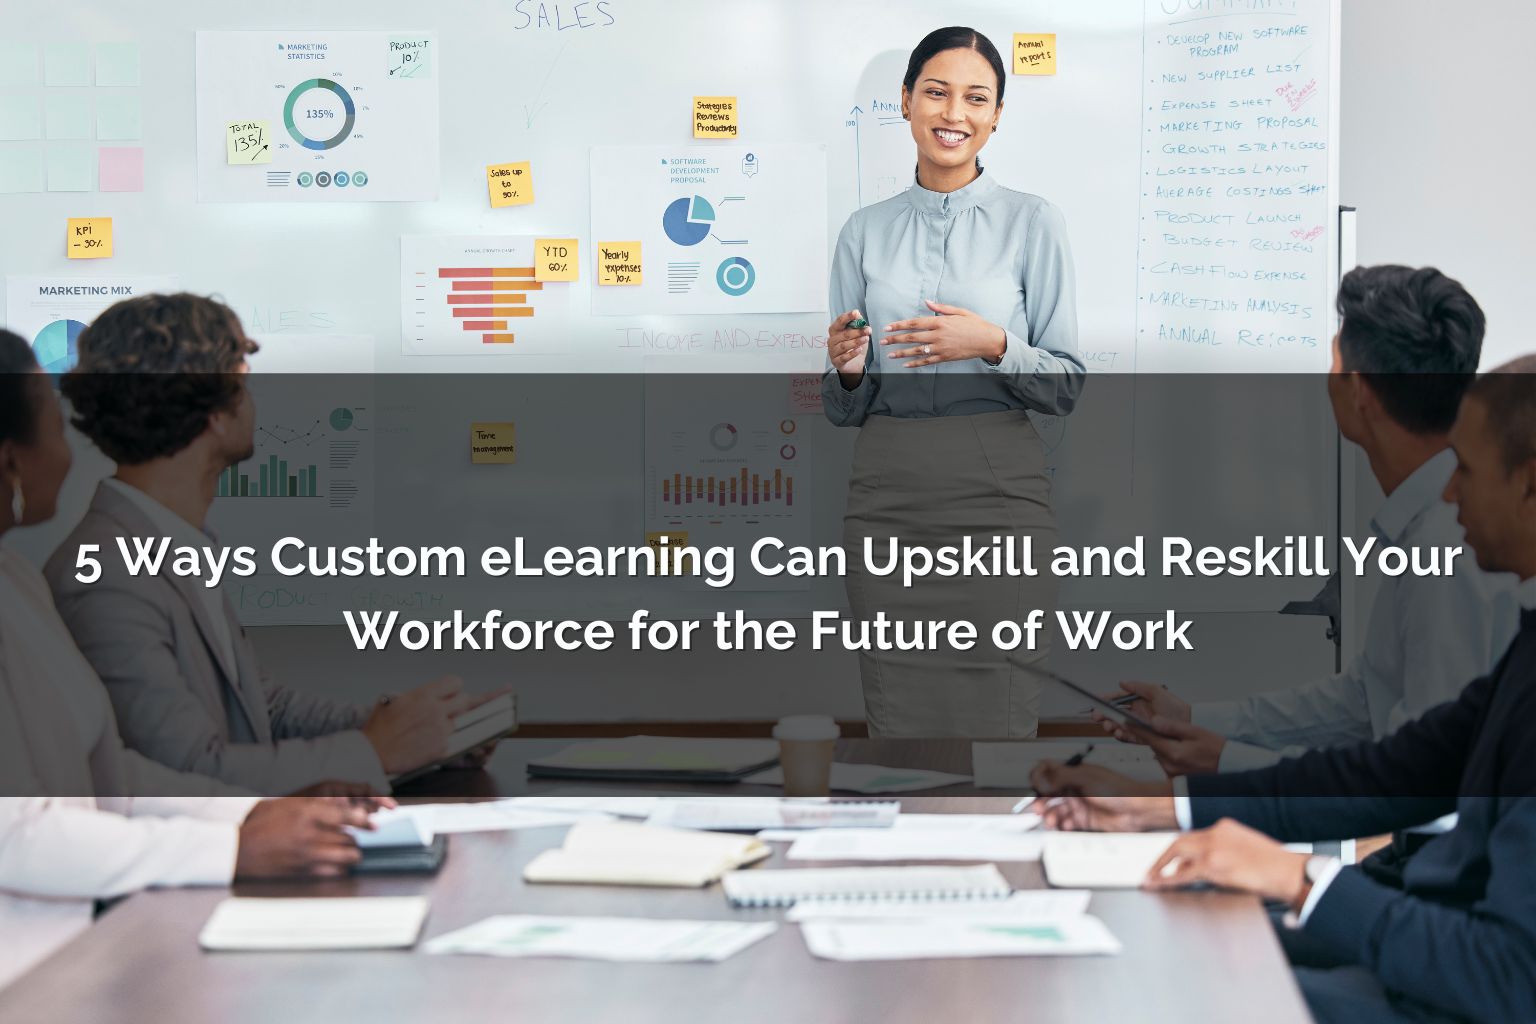 upskilling and reskilling your workforce with custom eLearning - Poncho eLearning